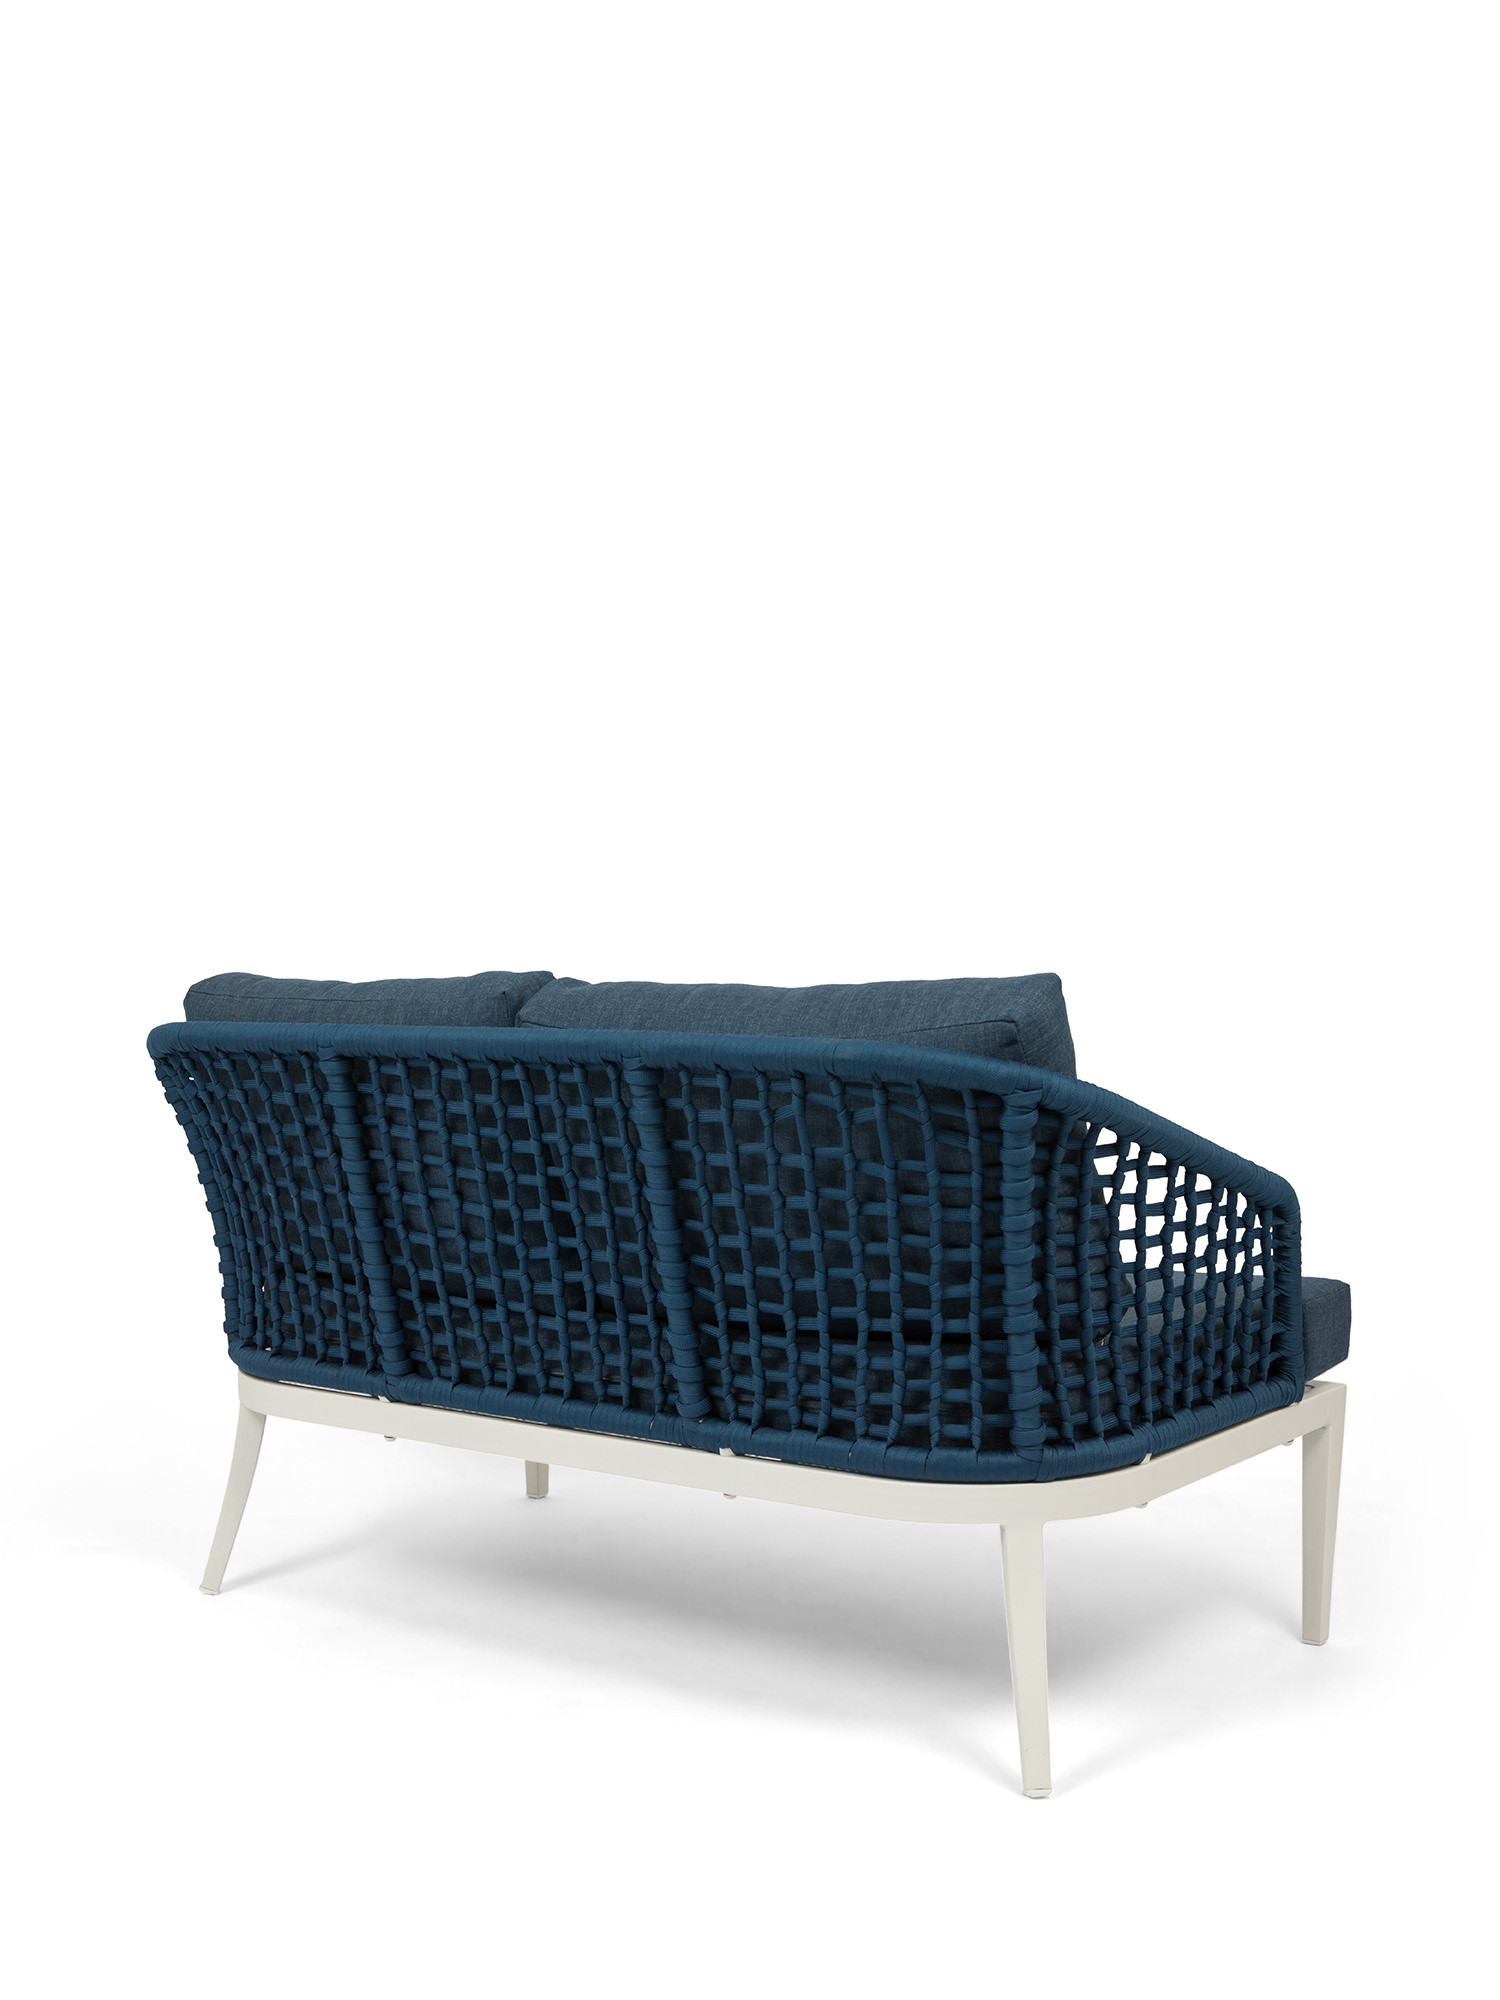 Mediterranean 2-seater sofa in polyester and aluminium, Blue, large image number 1